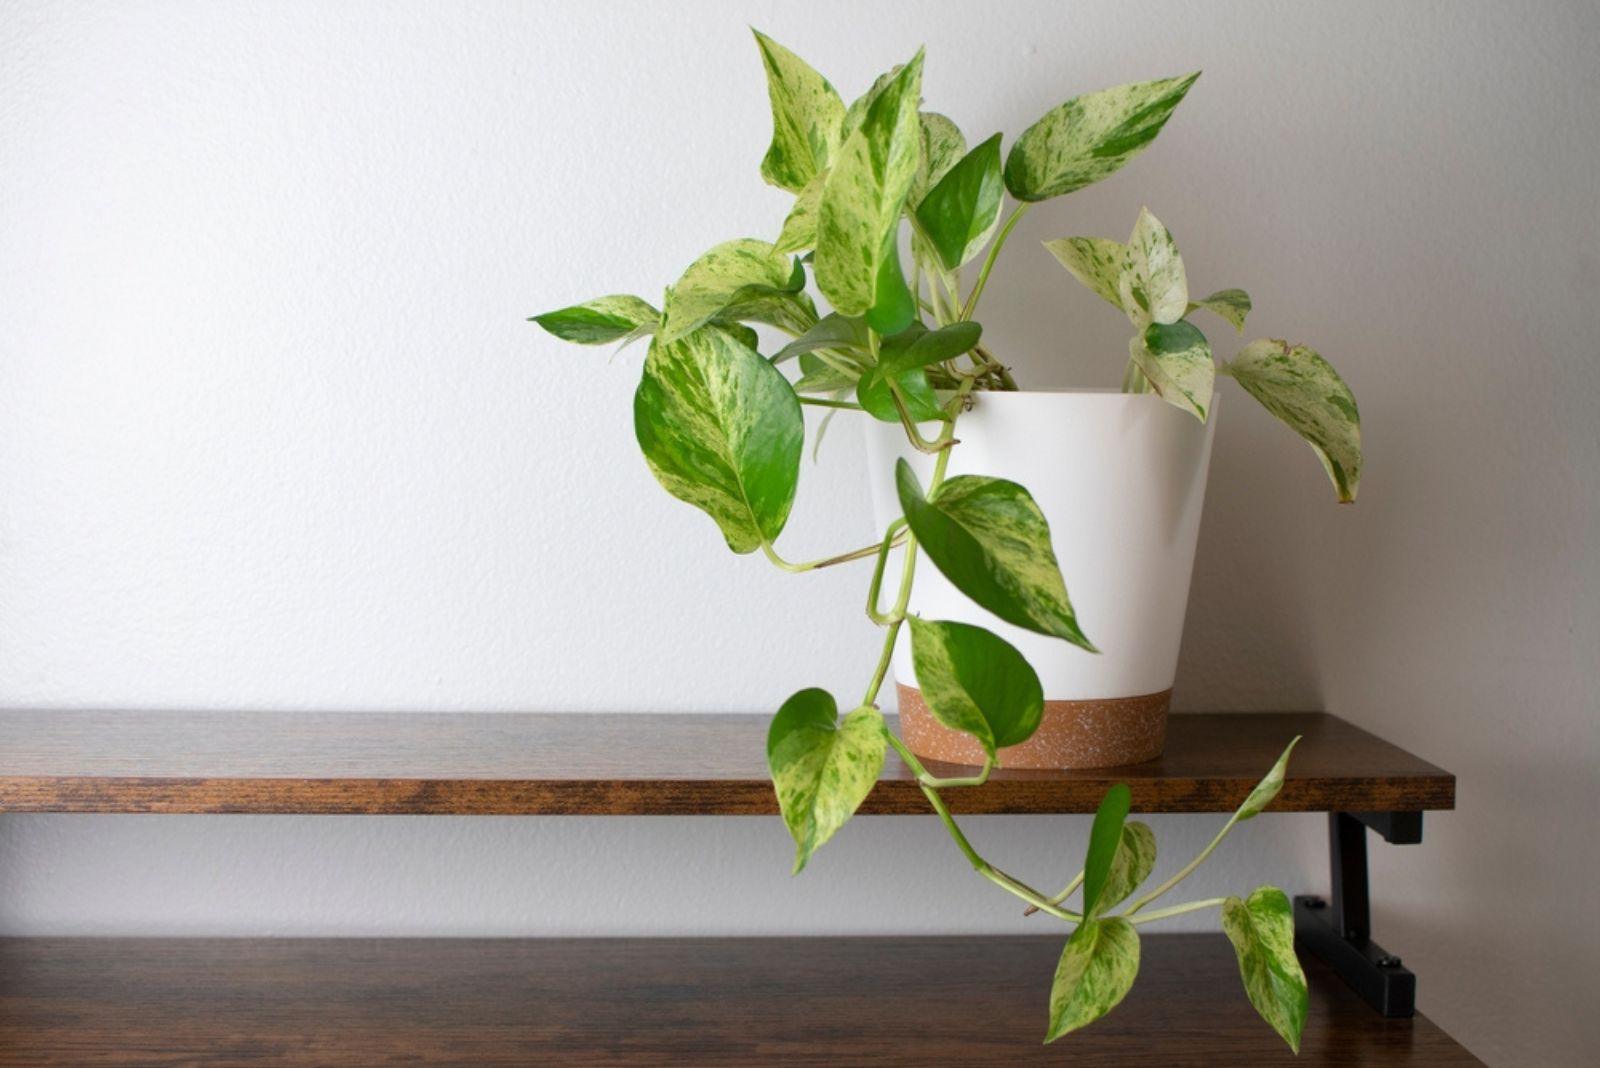 The white and green variegated leaves of Marble Queen Pothos